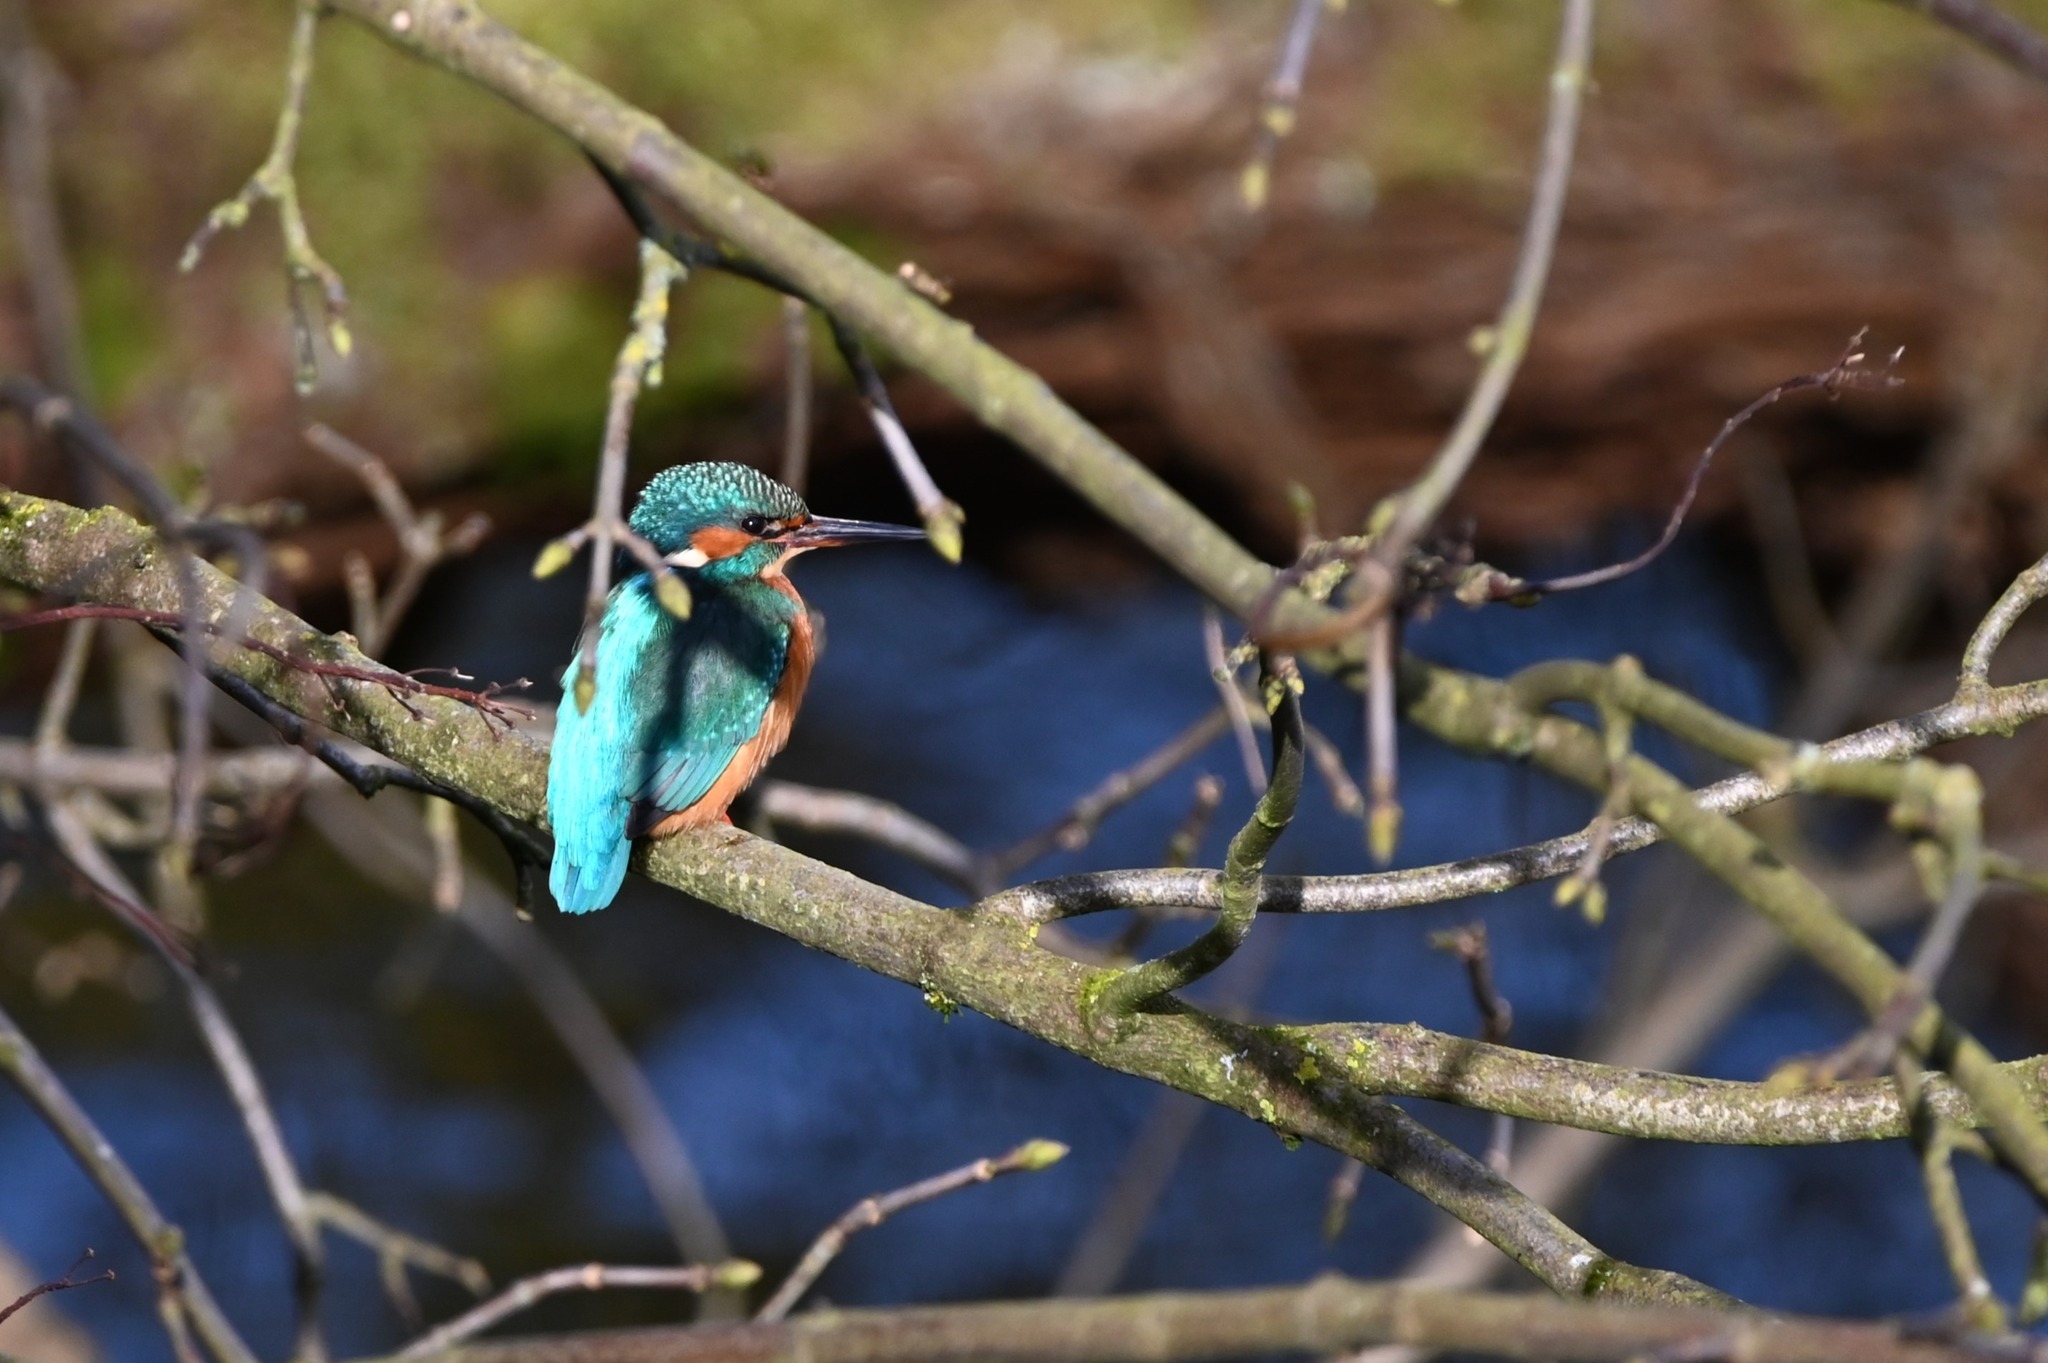 A kingfisher among the first buds by Candy Lean